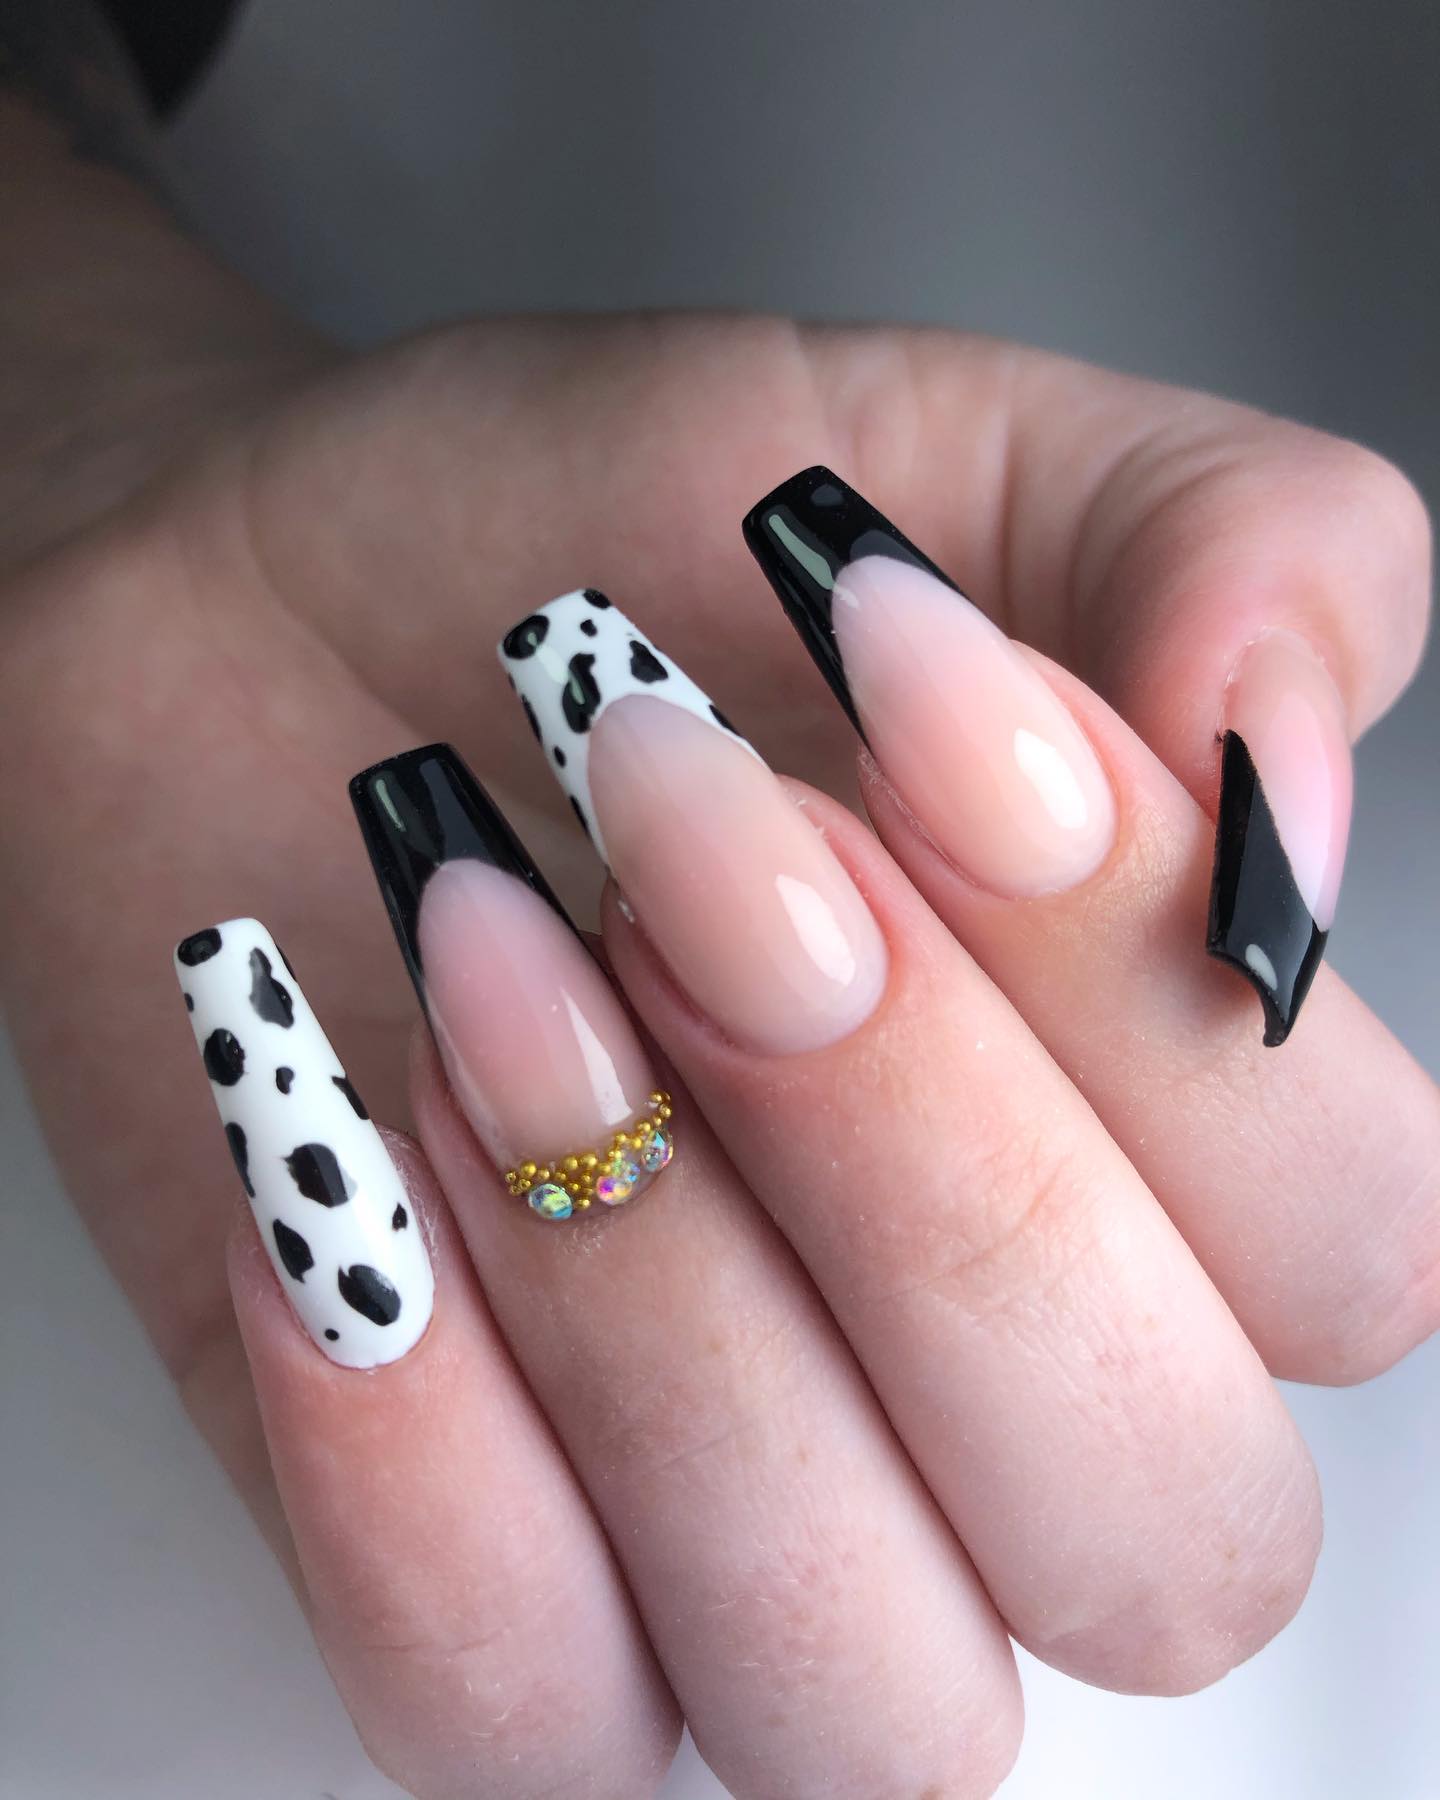 Here is an another cow print French mani idea but in this one, it is used as an accent nail. Black is such an elegant color that it turns everything into an art piece, so let's combine these two!